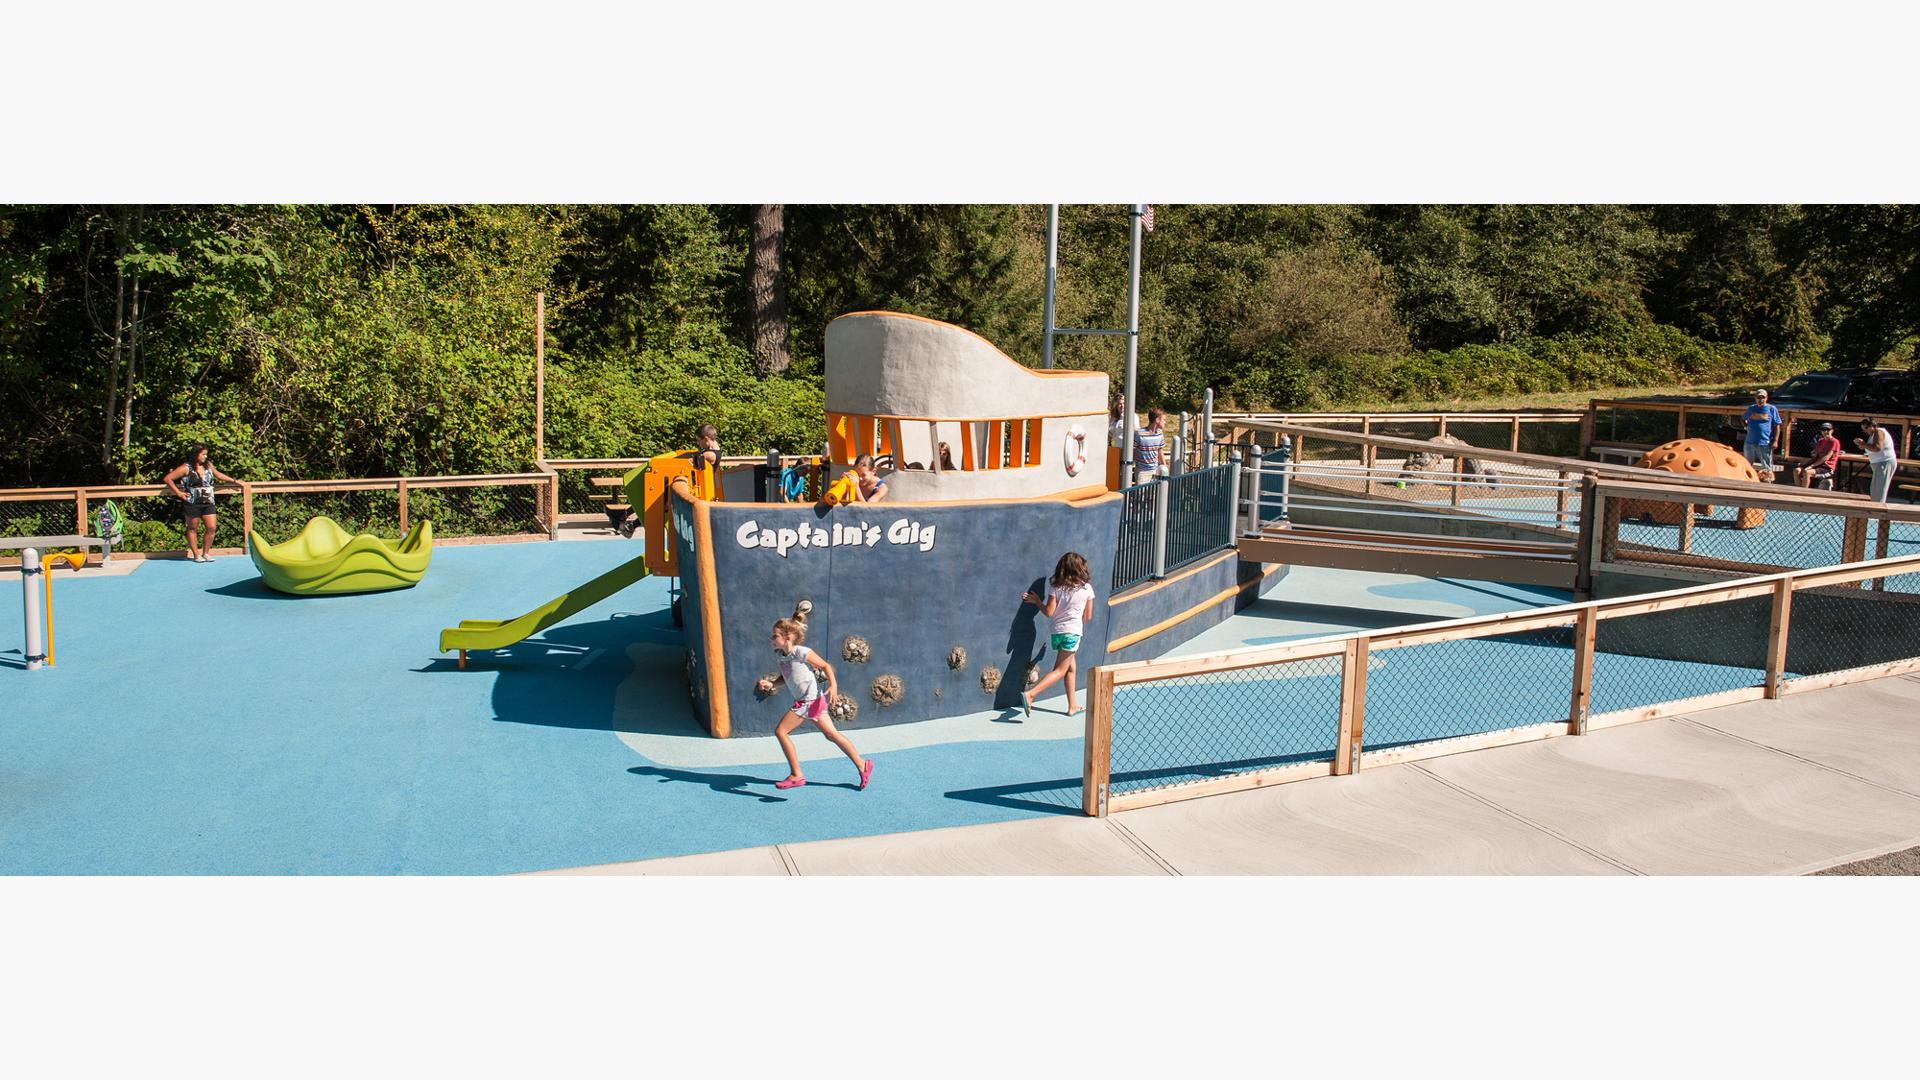 Two girls running in front of boat play structure